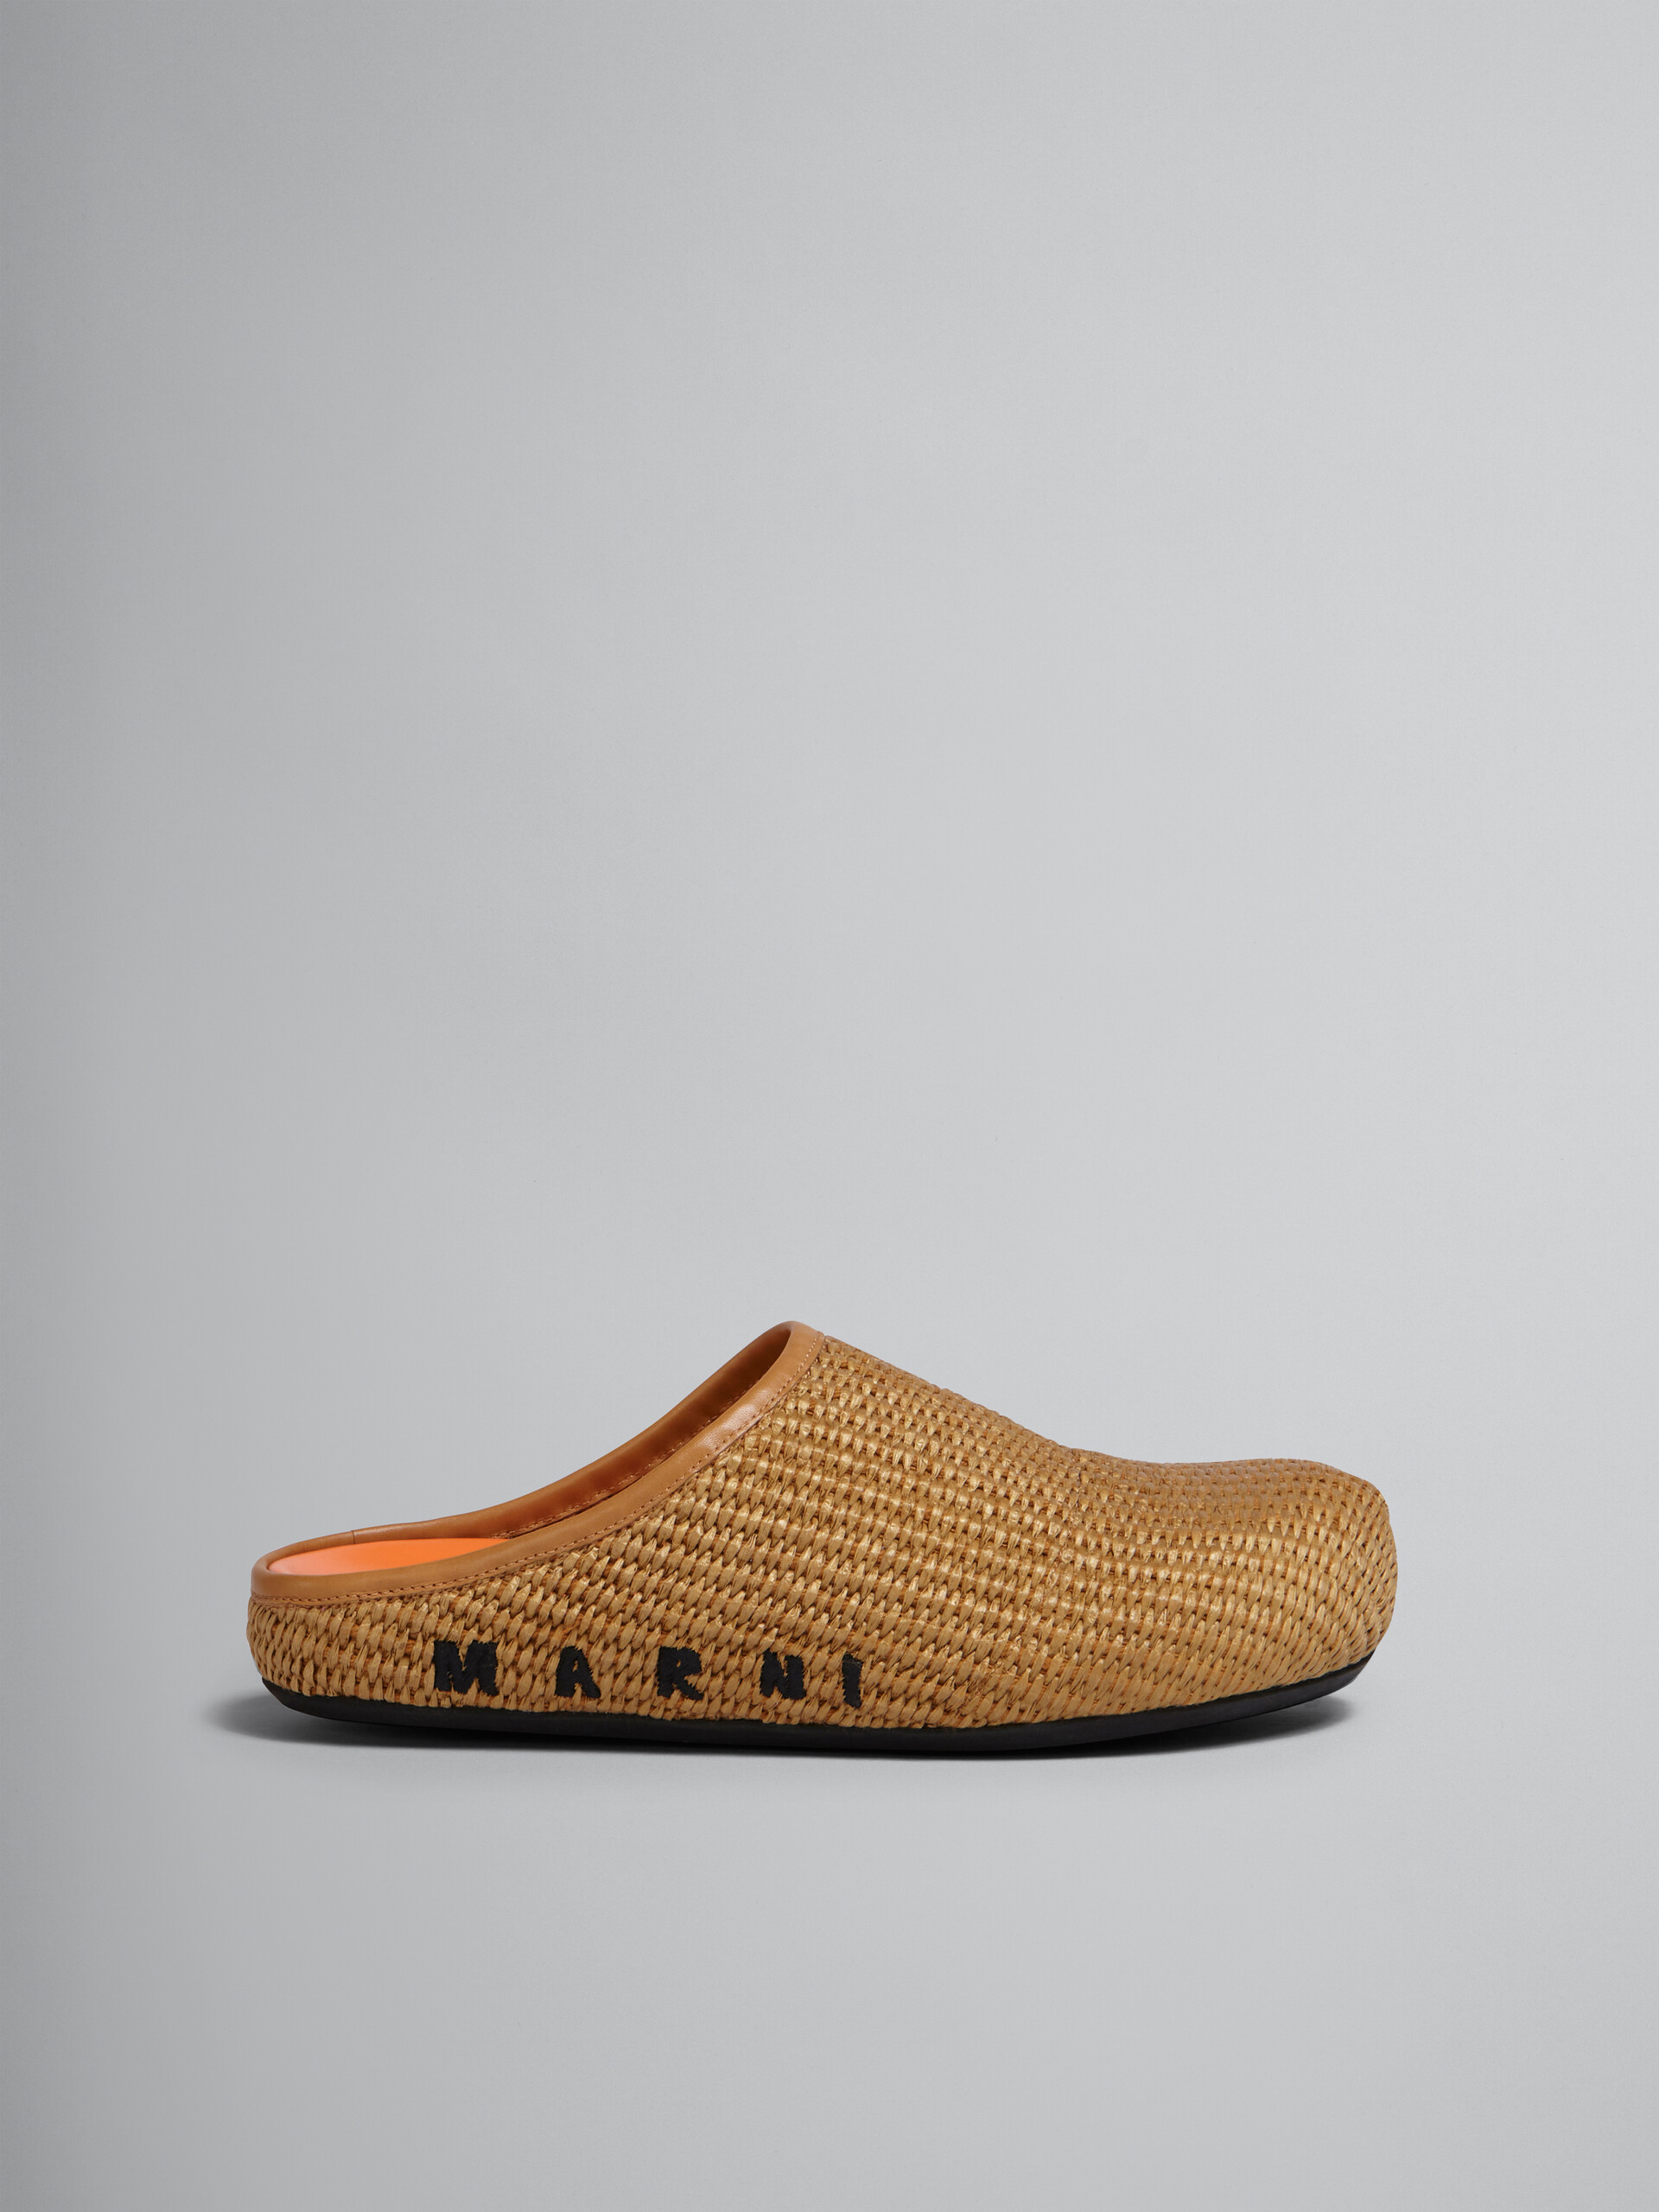 Brown raffia and leather Fussbett sabot - Clogs - Image 1